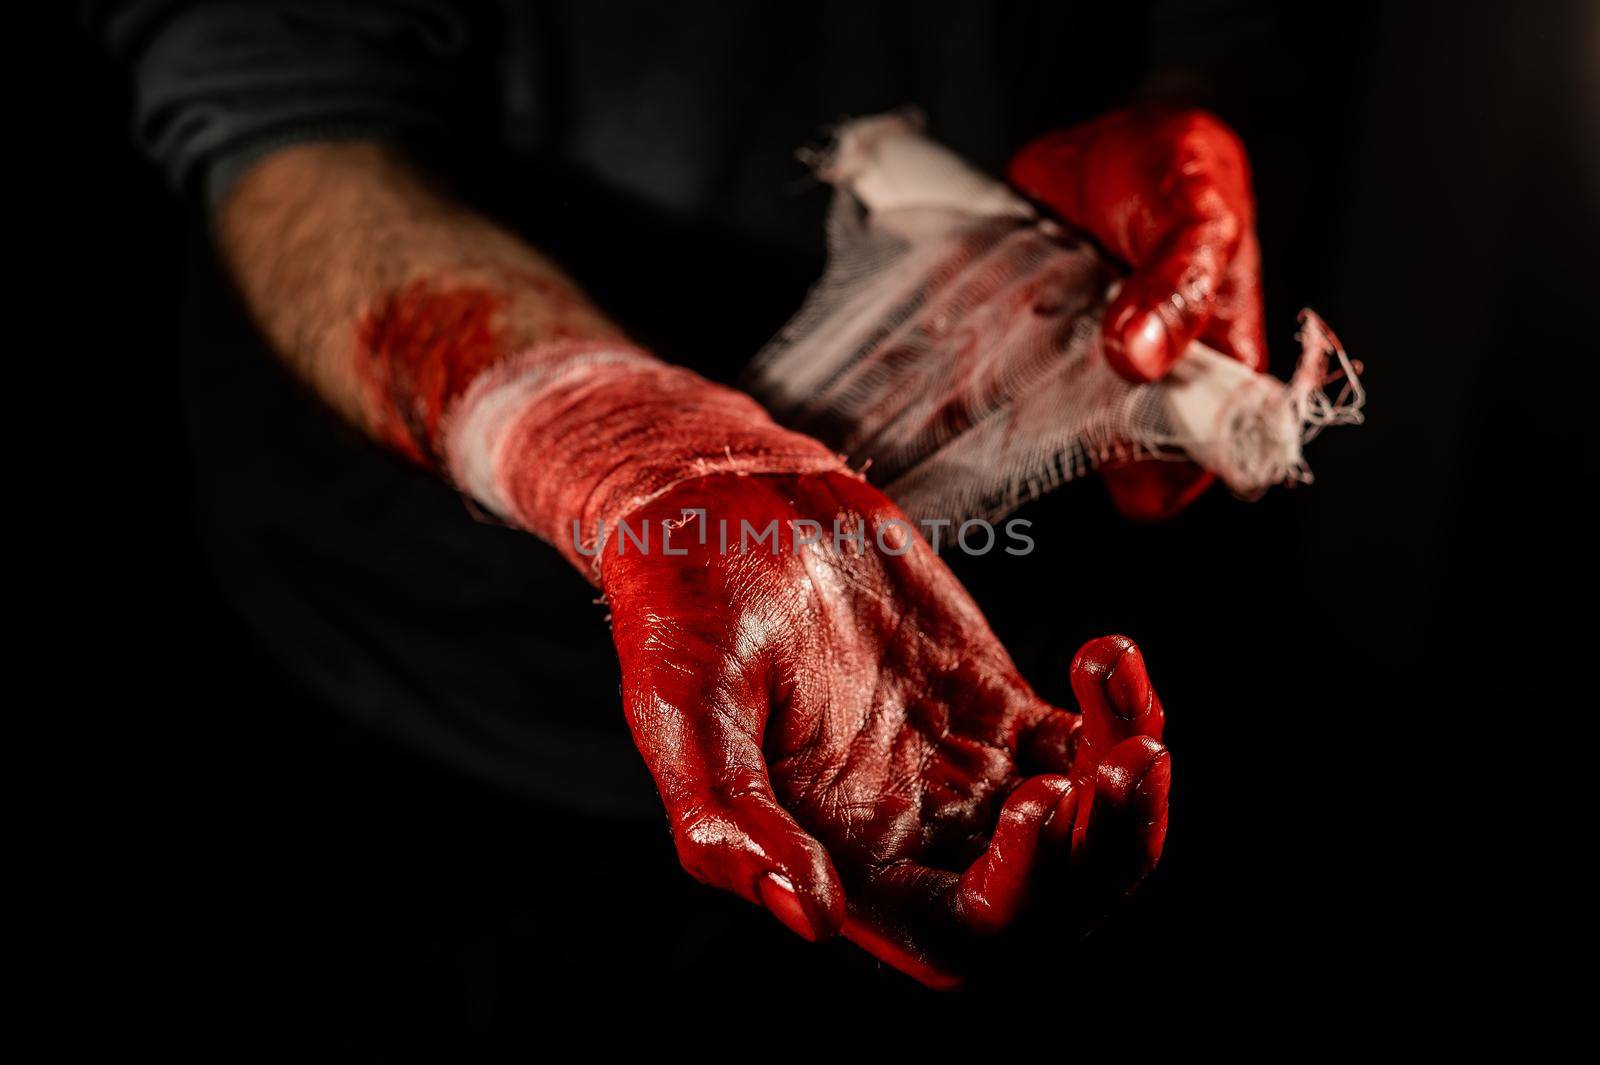 A man covered in blood bandages his hands. by mrwed54